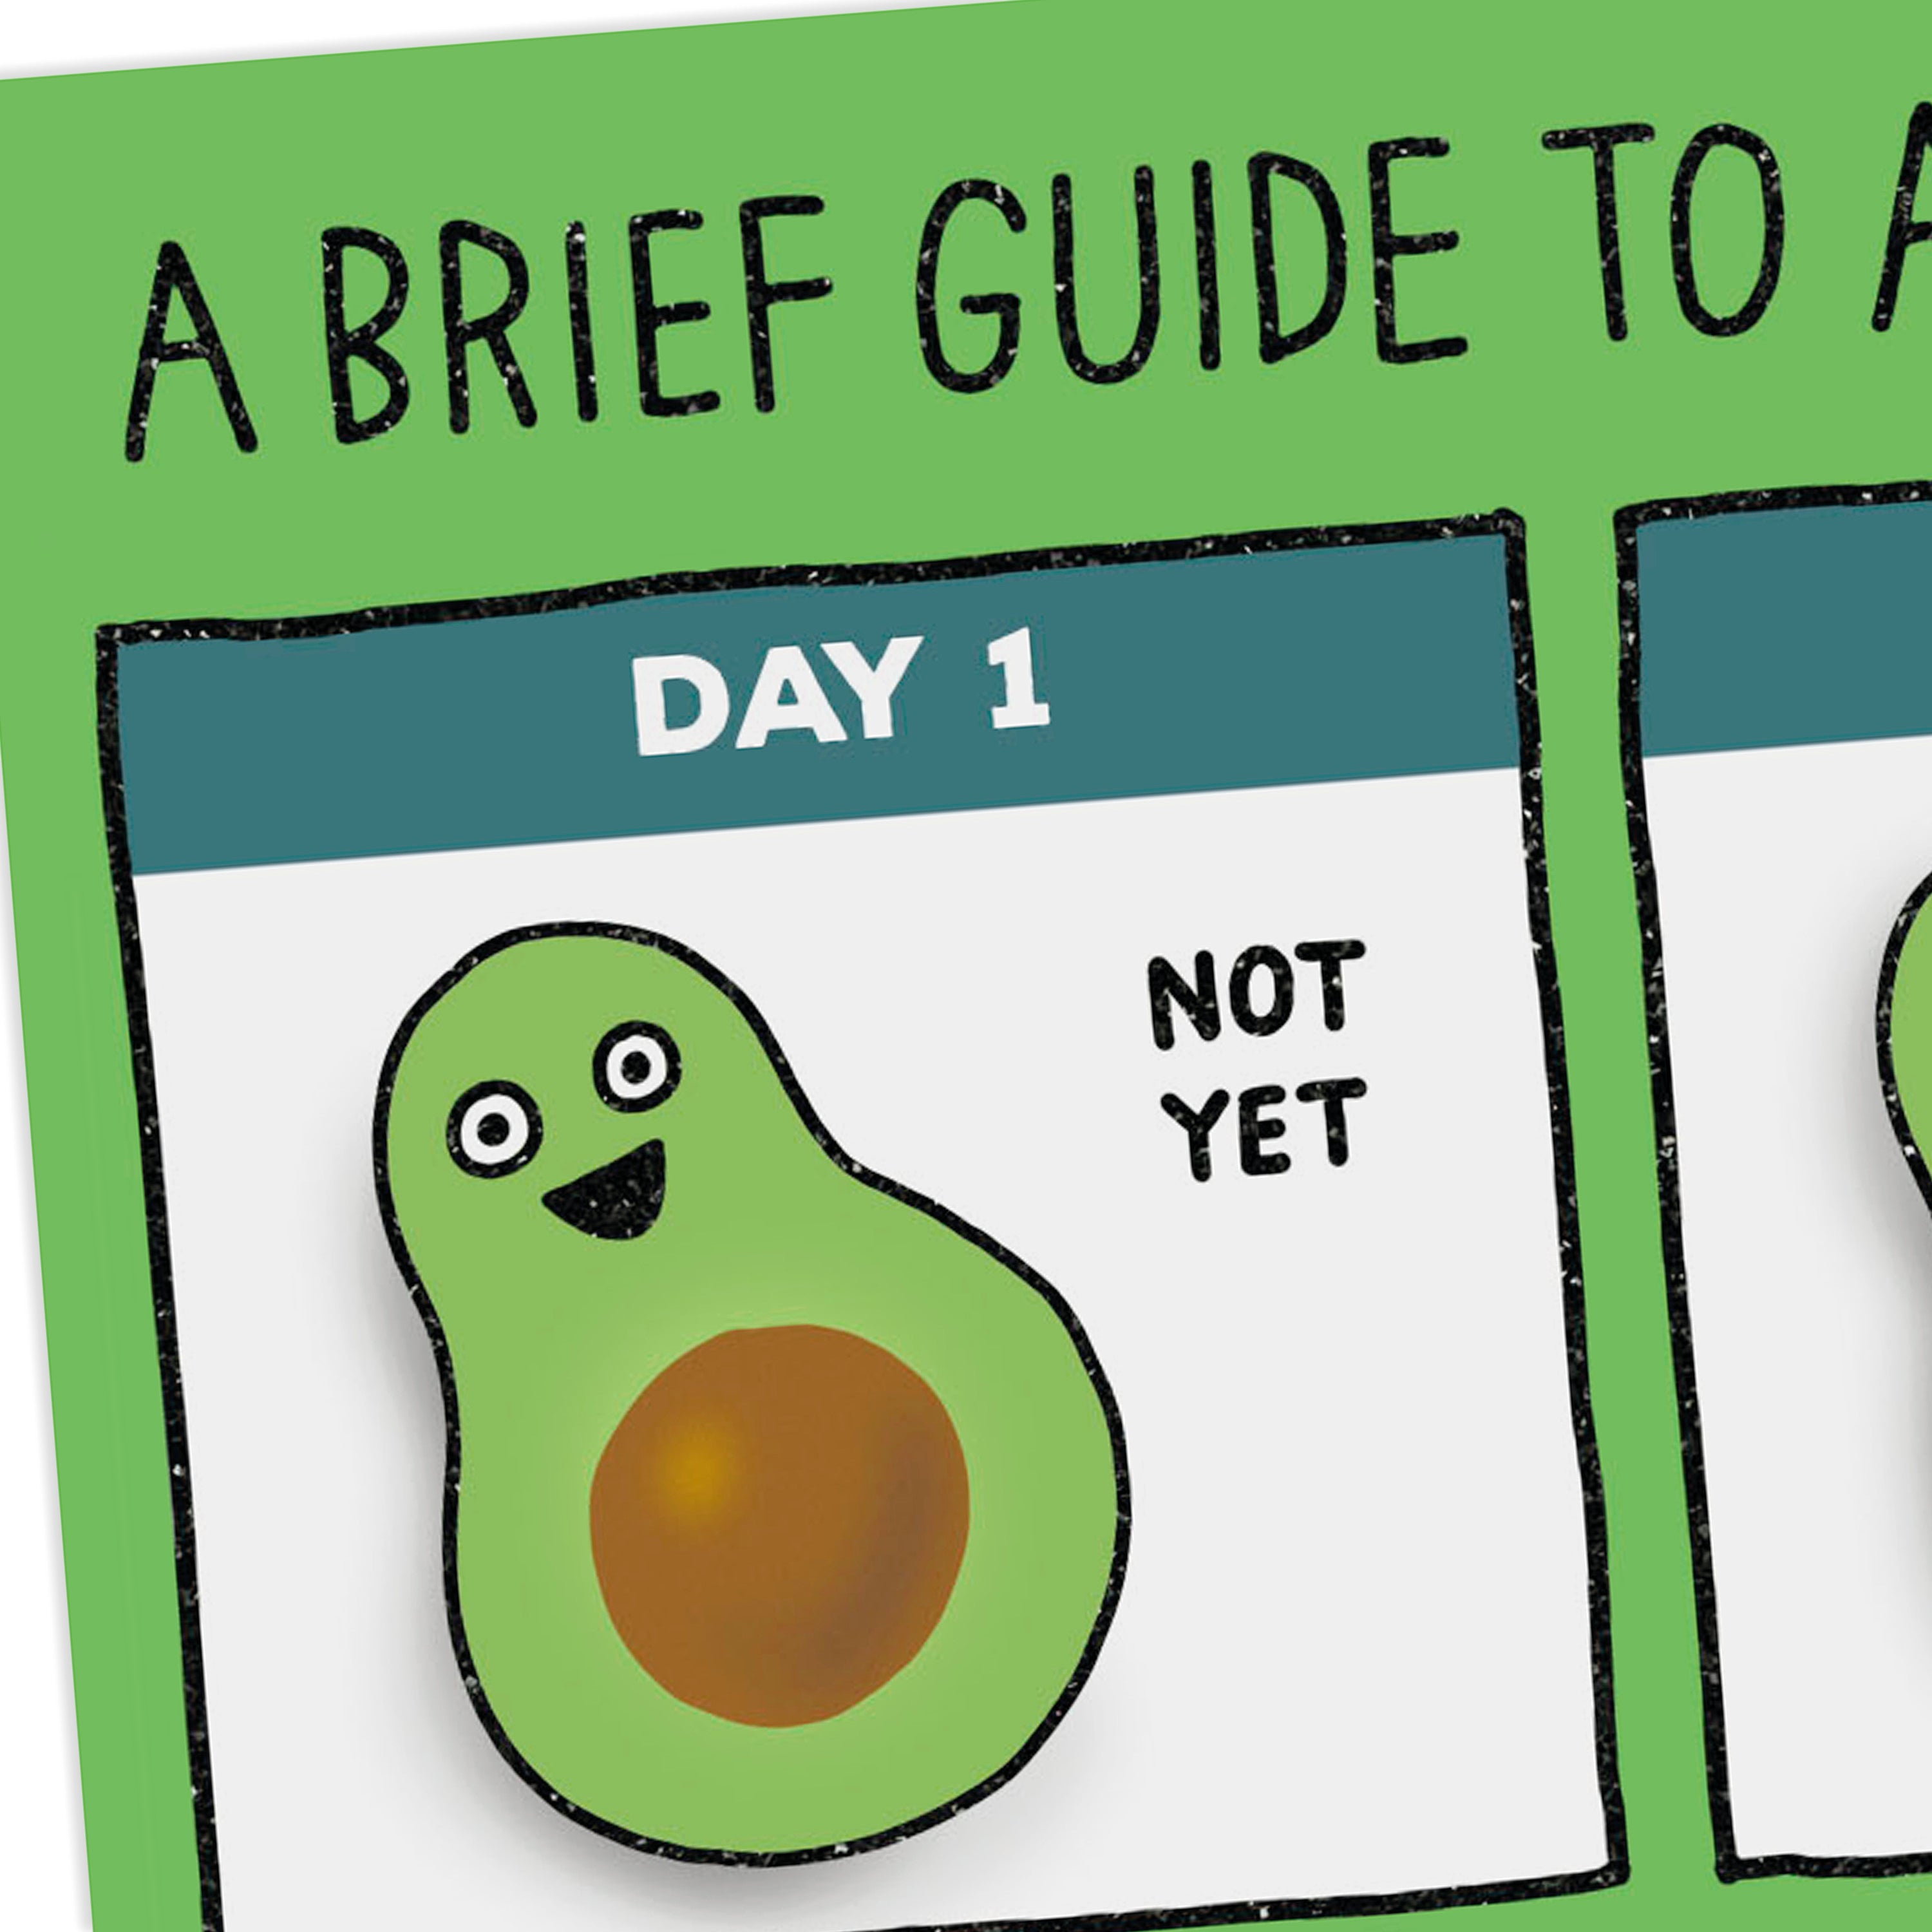 Shoebox Funny Birthday Card (Guide to Avocados)